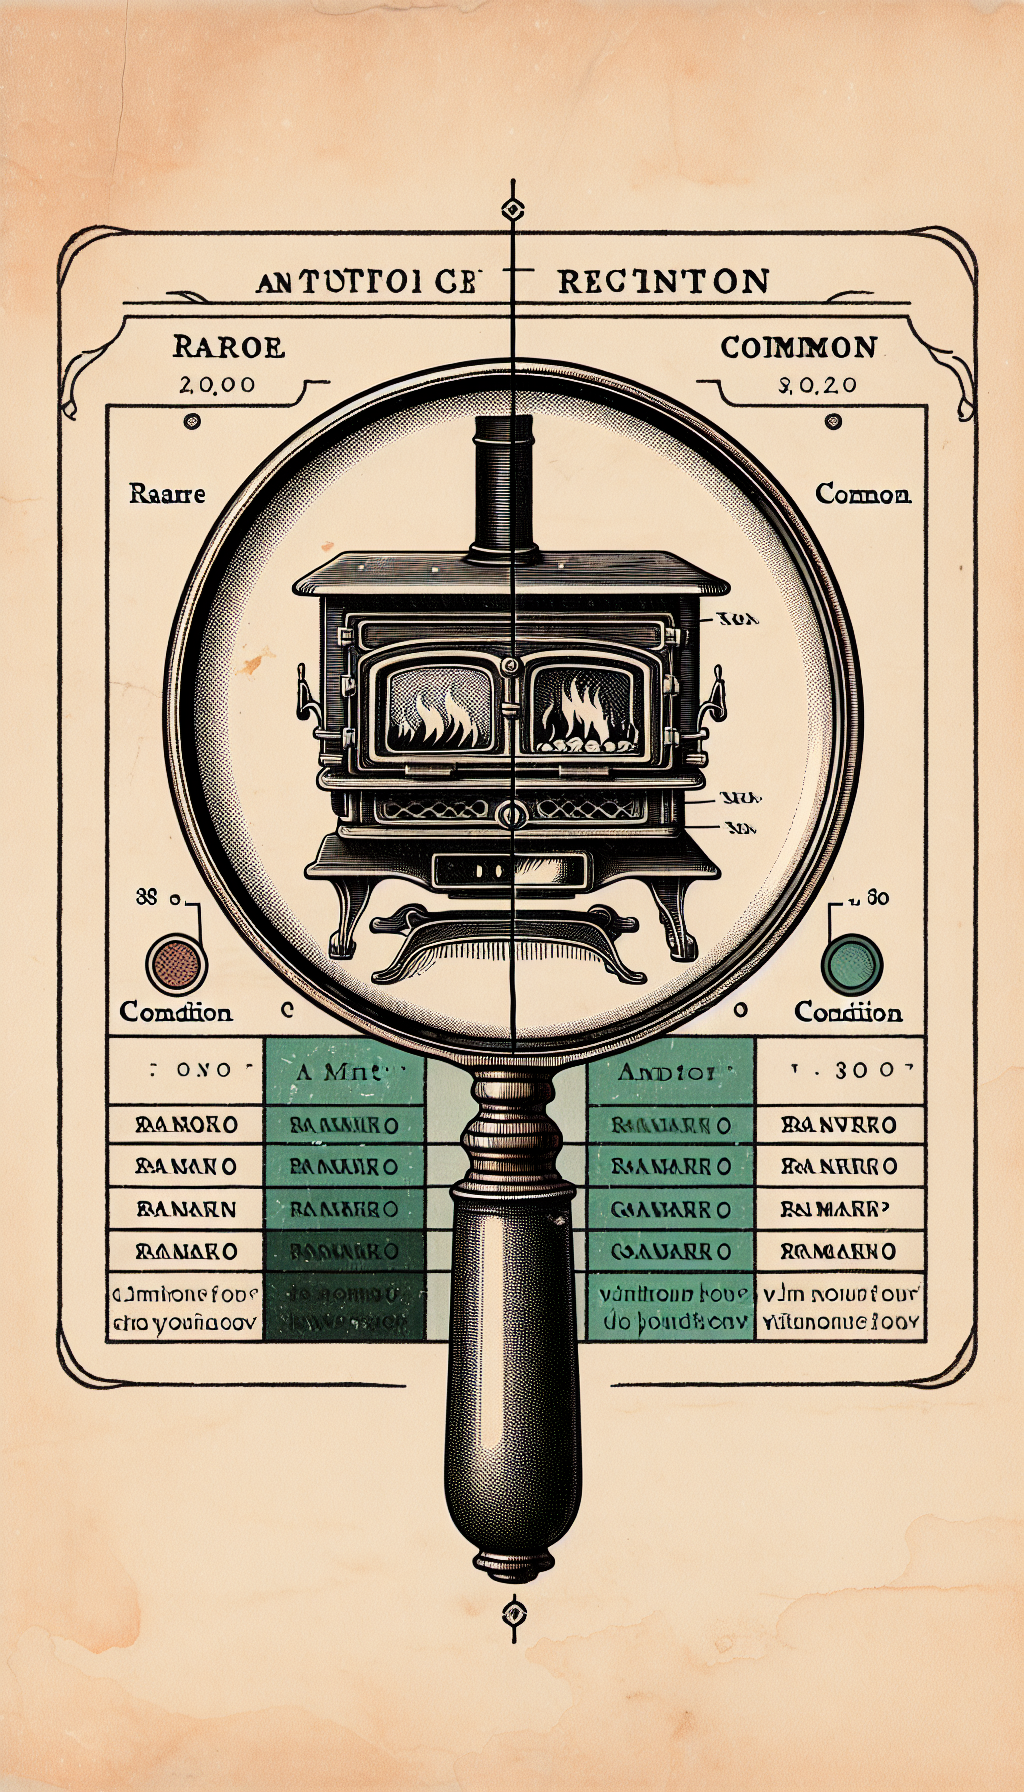 An illustration depicts a magnifying glass that encapsulates an antique parlor stove within its lens. The stove stands atop a graded scale ranging from 'Rare' to 'Common', with condition indicators such as 'Mint' to 'Worn' lining the sides. Styled half in crisp line art and half in soft watercolors, the imagery evokes a fusion of precision and nostalgia in valuing historical relics.